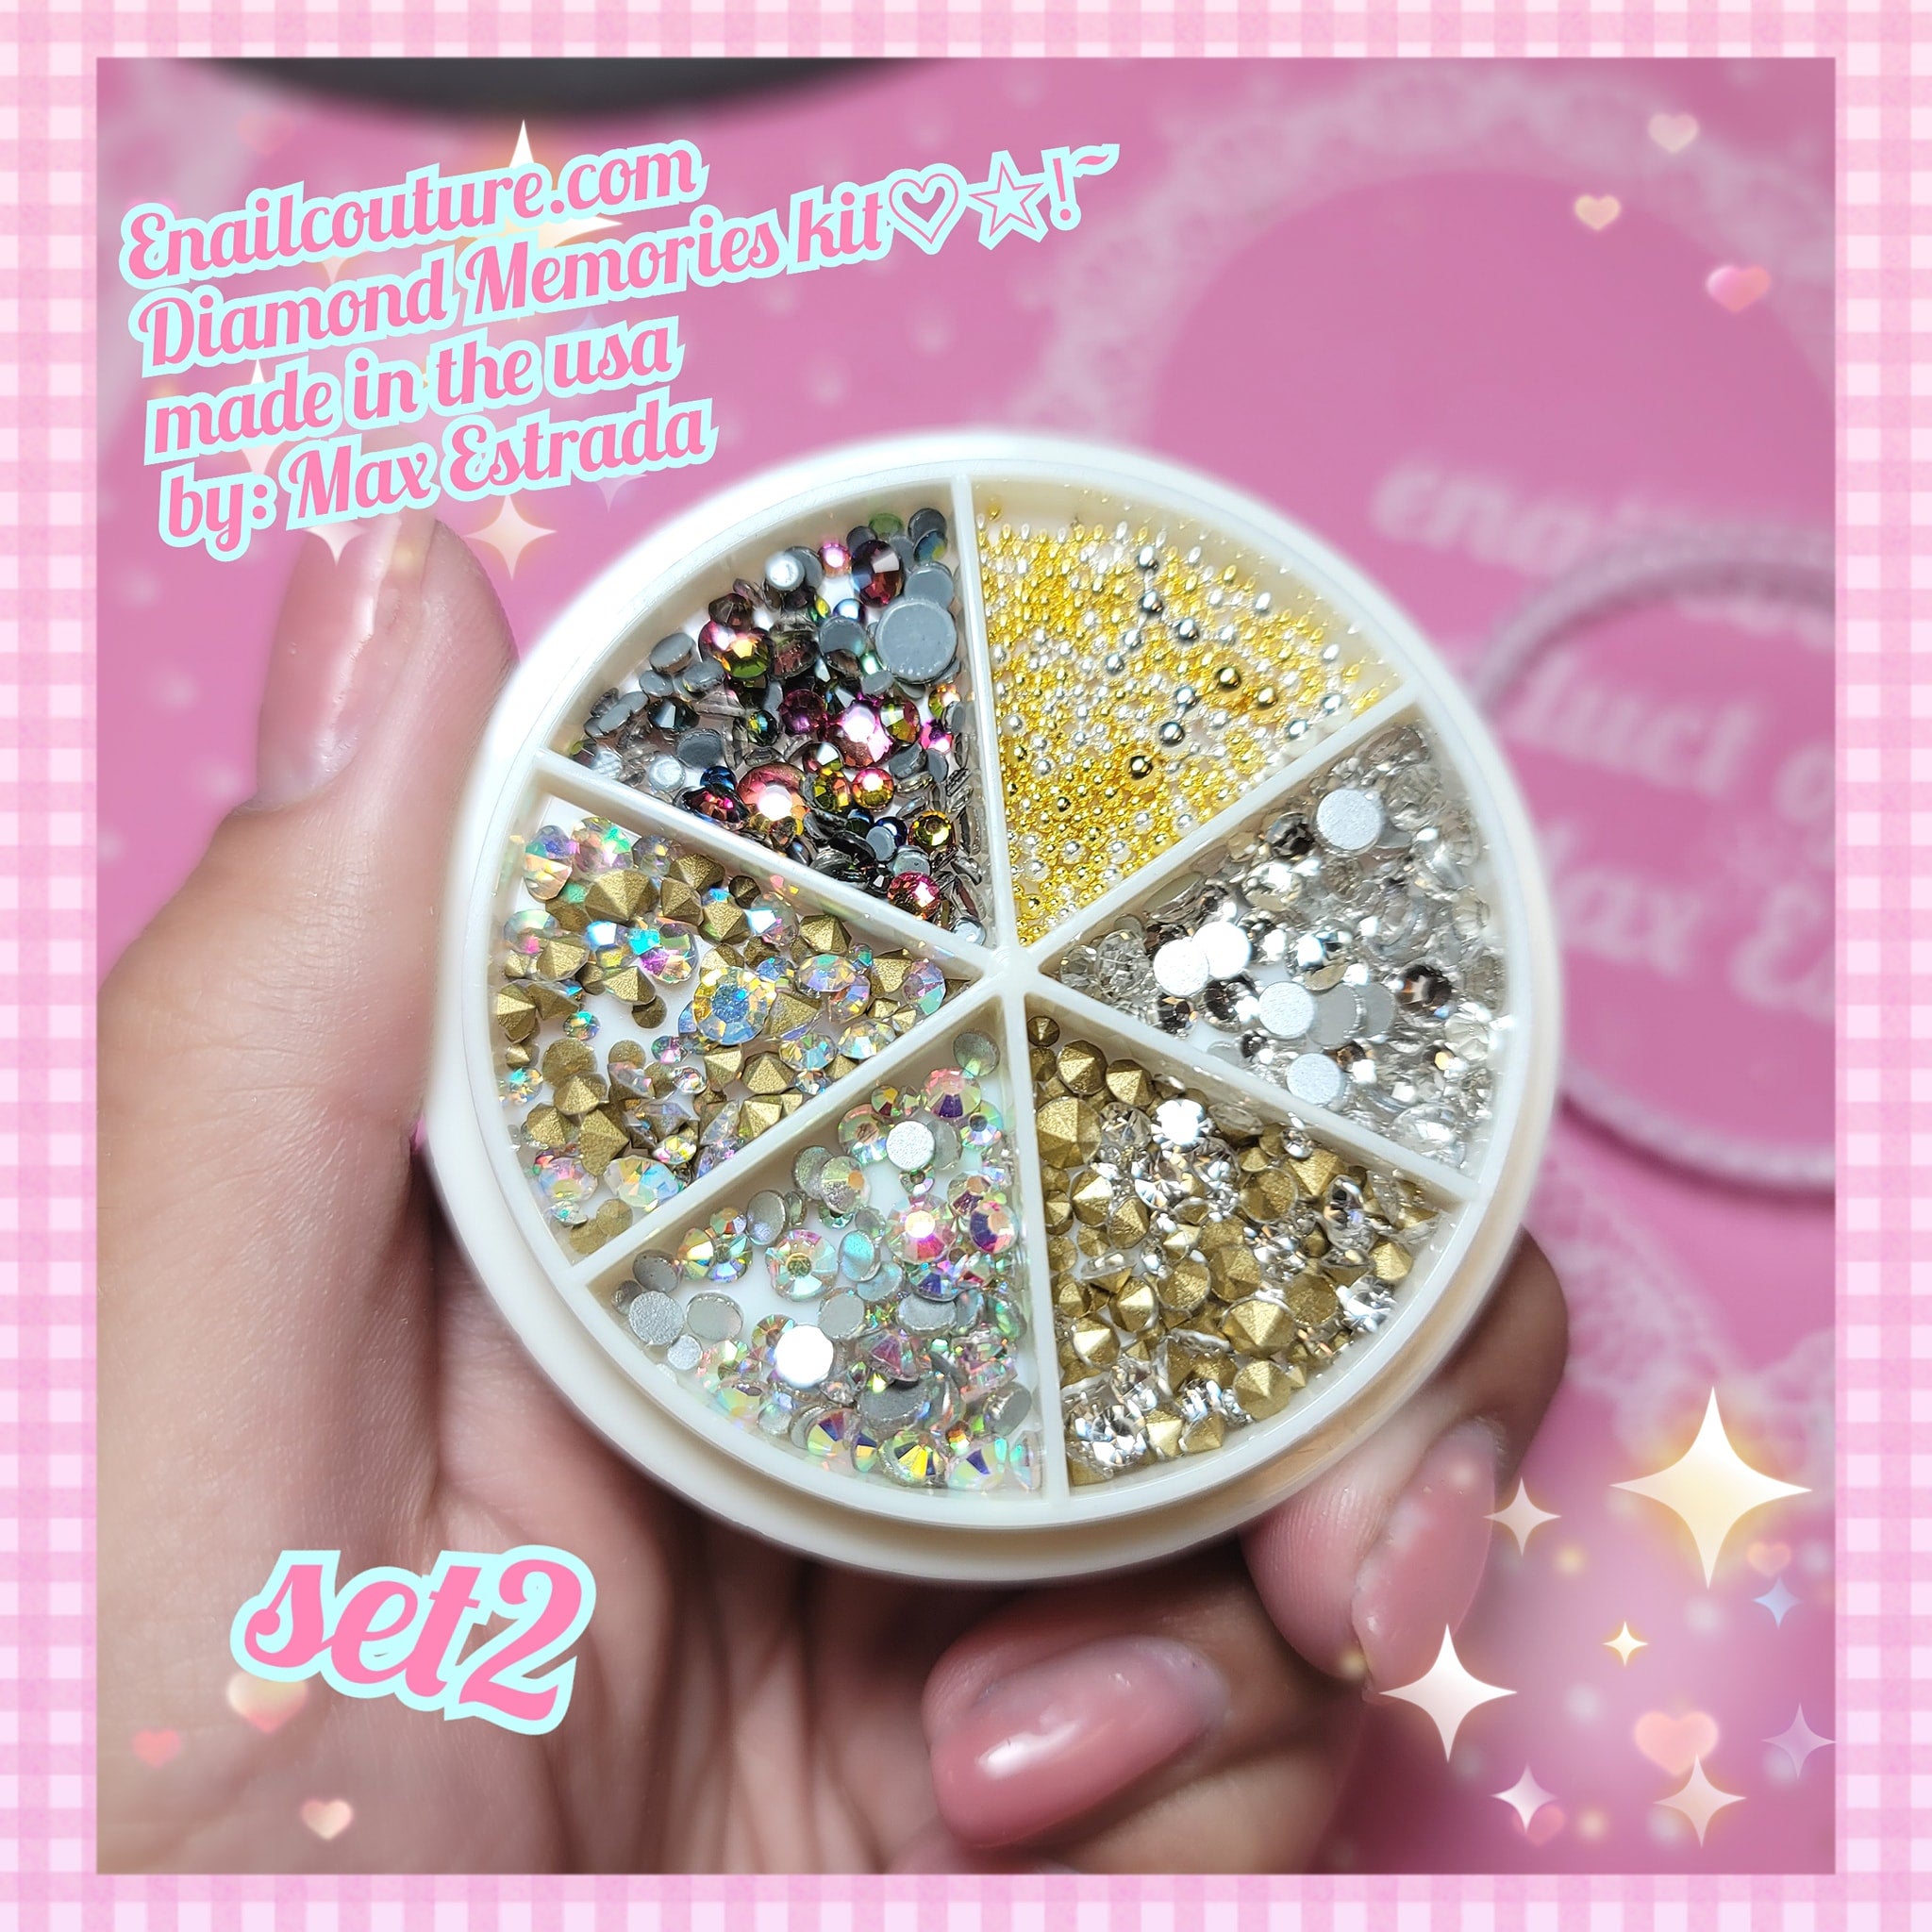 minkissy 4 Sets 12 Nail Decorations for Nail Art Bejeweled Kit Gem Beads  Mixed Beads Jewelry Kit Diamond Beads Nail Art Rhinestones Nails  Rhinestones